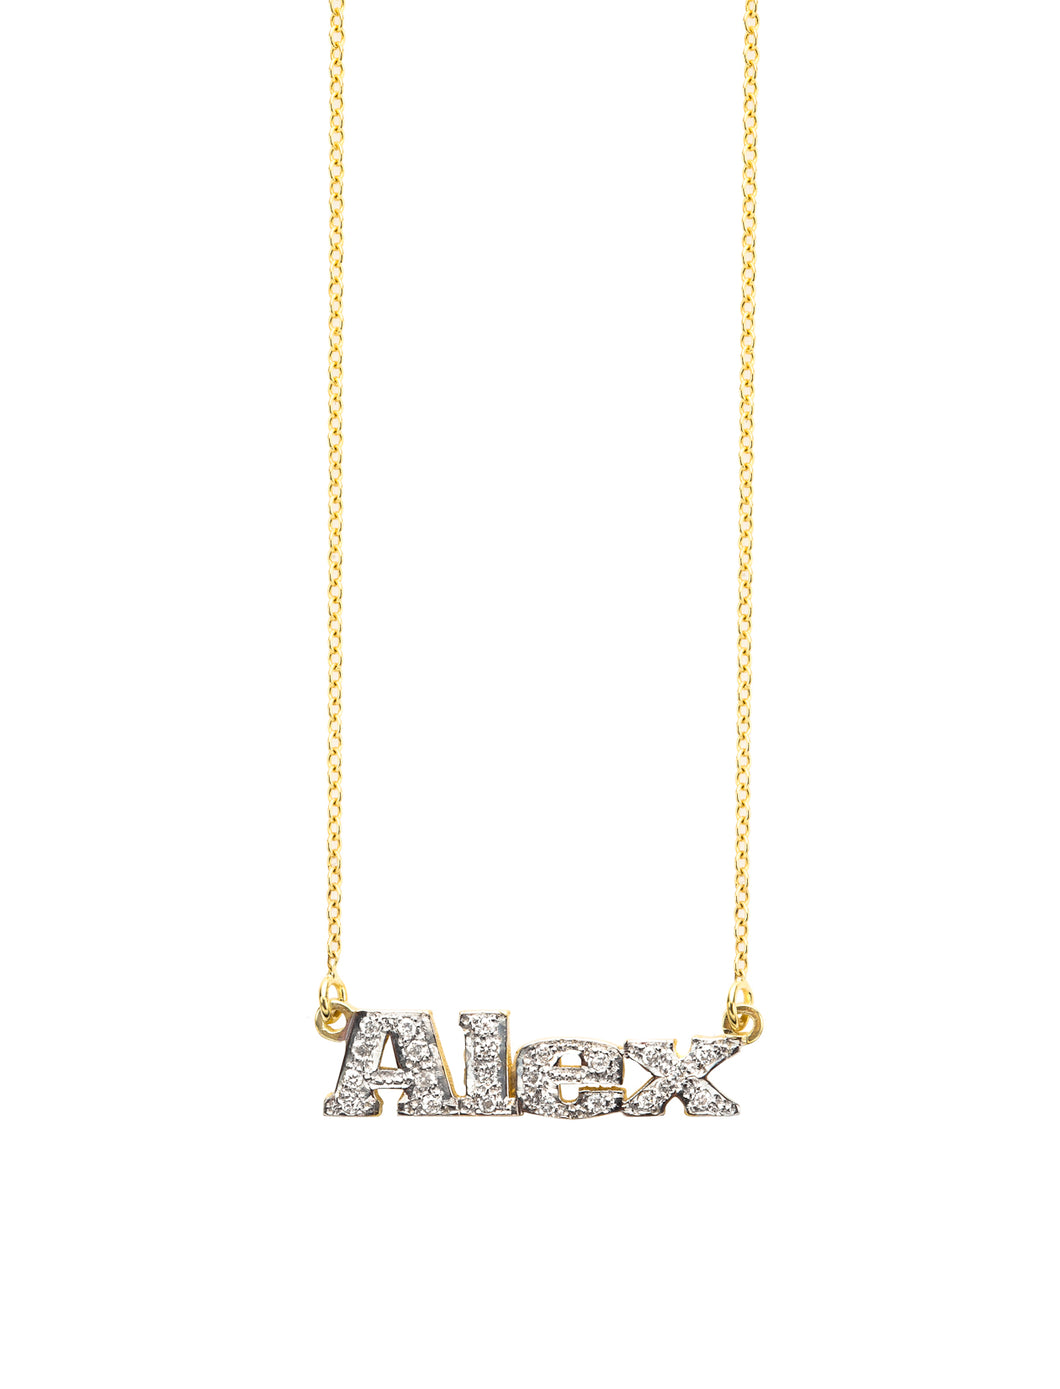 Nameplate Block Letters with White Diamonds | Kacey K Jewelry.